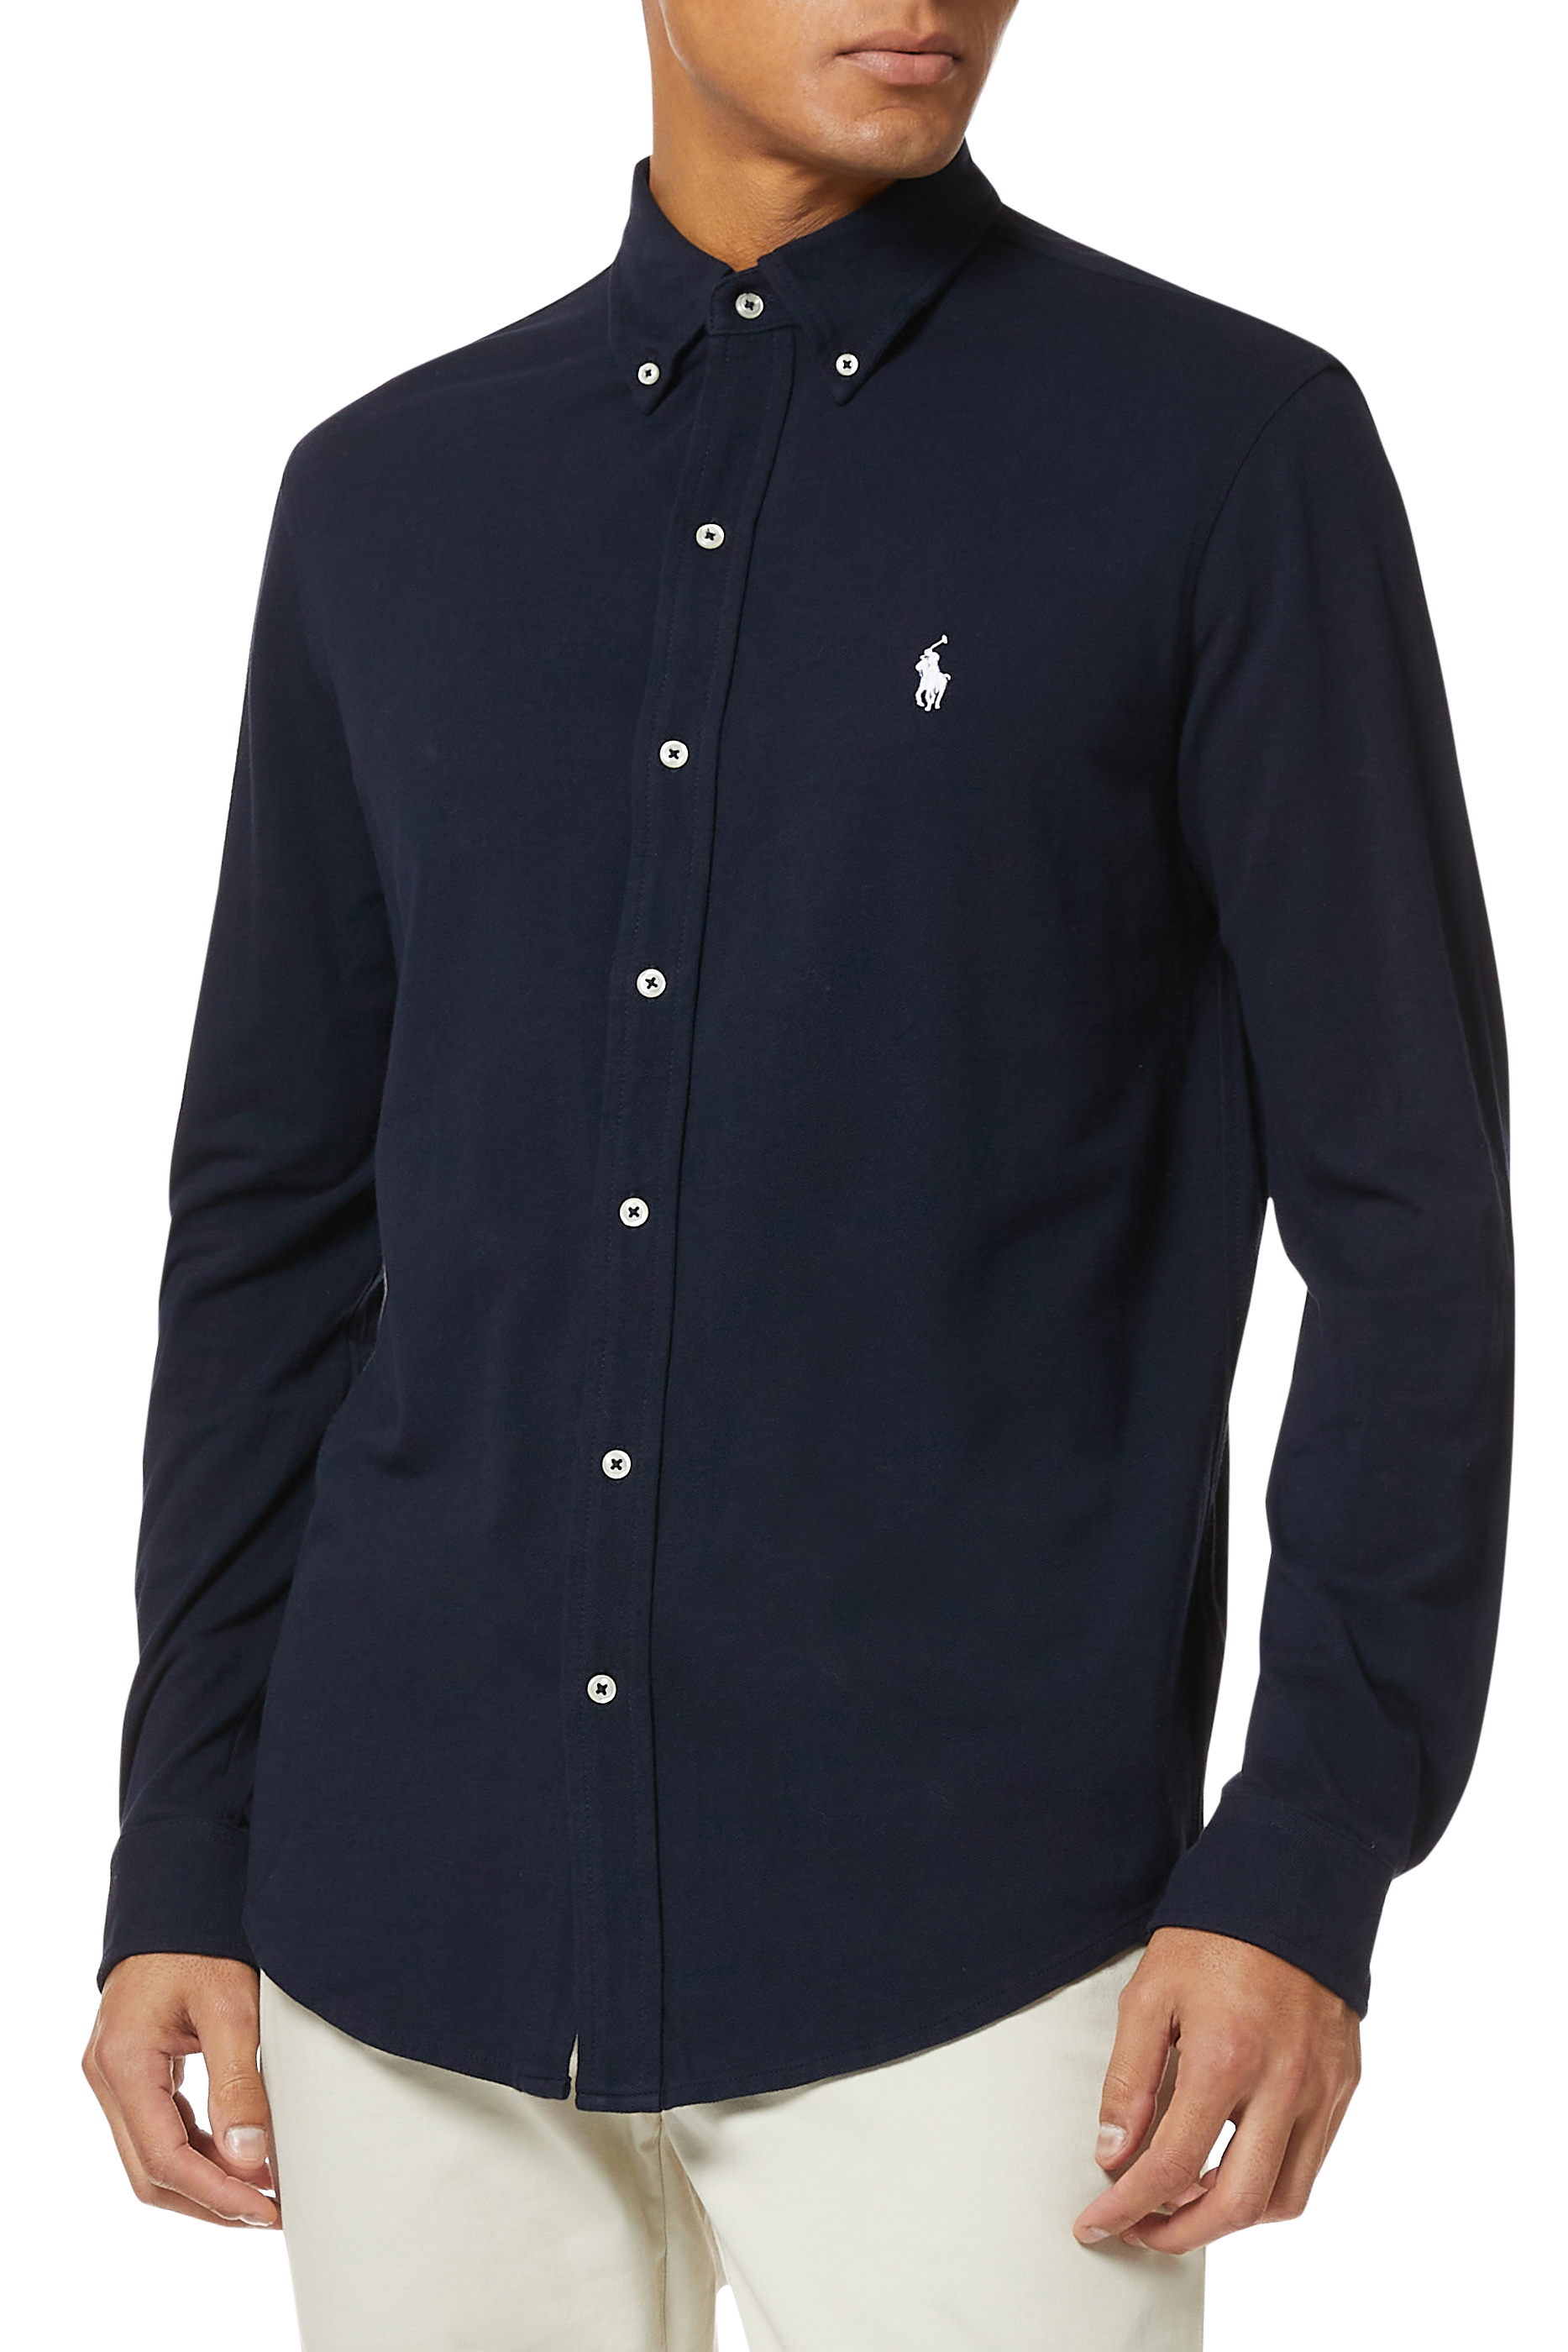 Buy Polo Ralph Lauren Slim-Fit Polo Shirt - Mens for AED 410.00 Polos ...